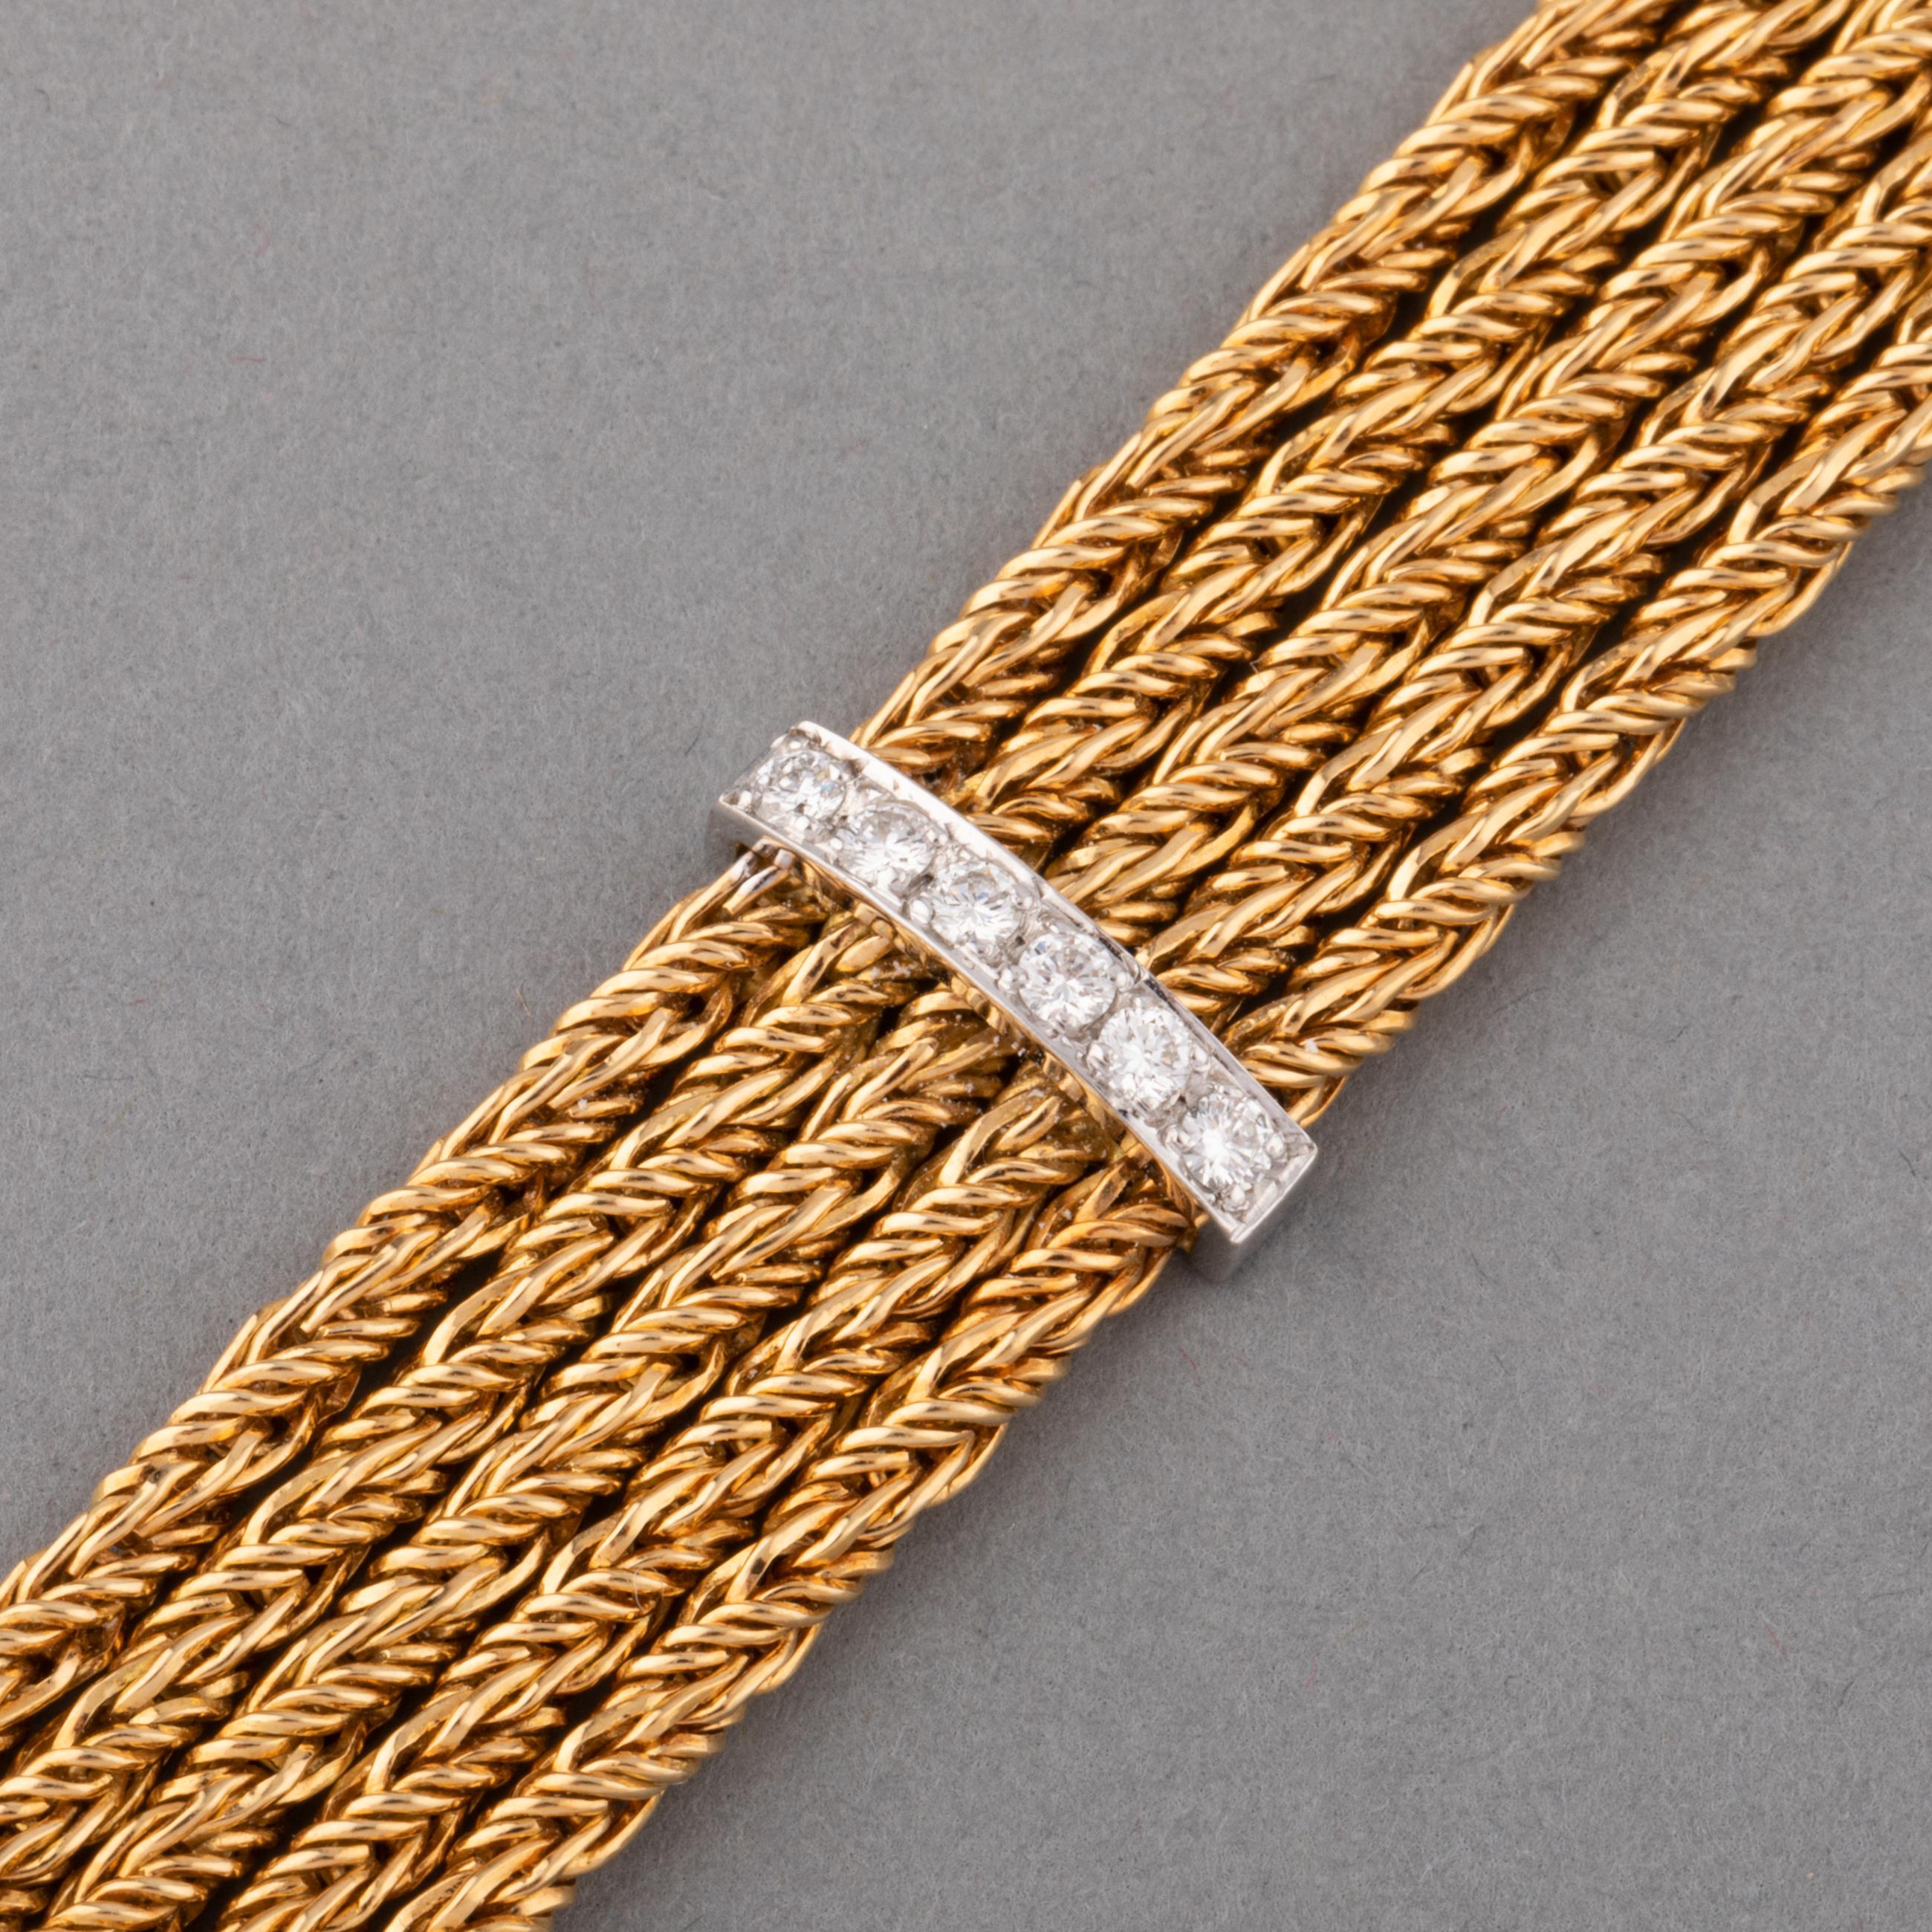 A very lovely vintage bracelet, made in France circa 1960.

Made in 18k gold and set with 2 carats of diamonds.
The length is 19cm and width 14mm.
Total weight: 42.20 grams.